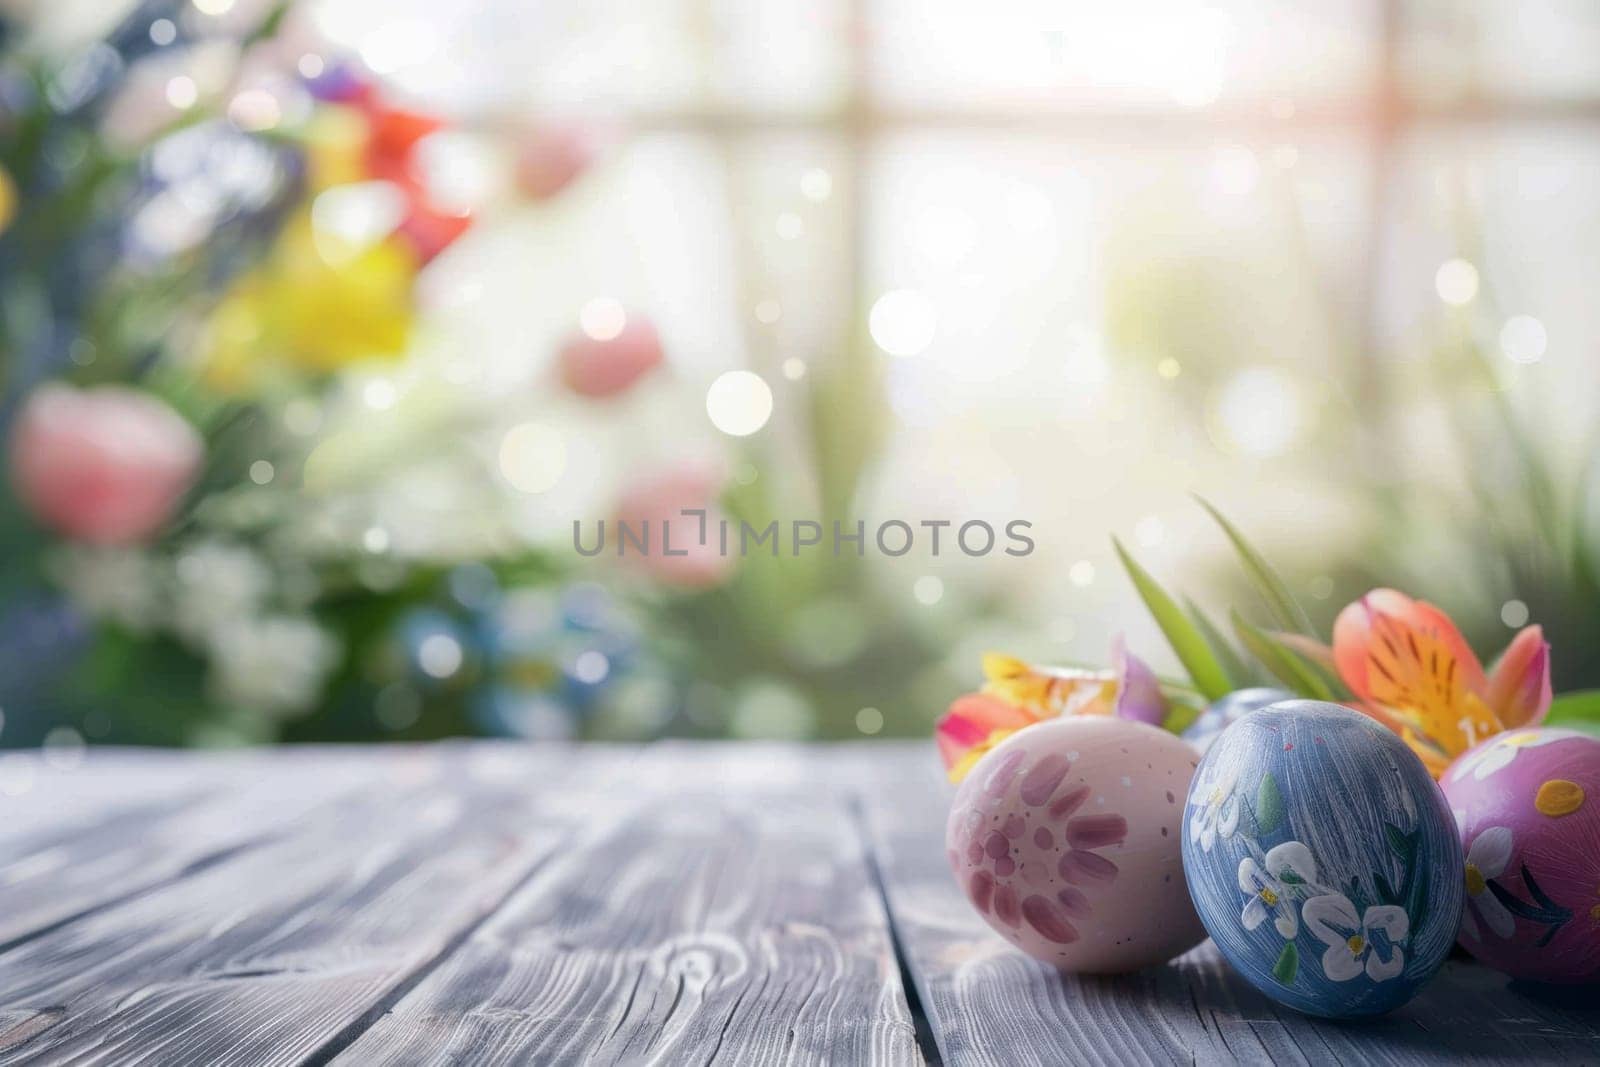 A wooden table with a bunch of Easter eggs on it. The eggs are painted and arranged in a row. The table is surrounded by flowers and plants, creating a cheerful and festive atmosphere